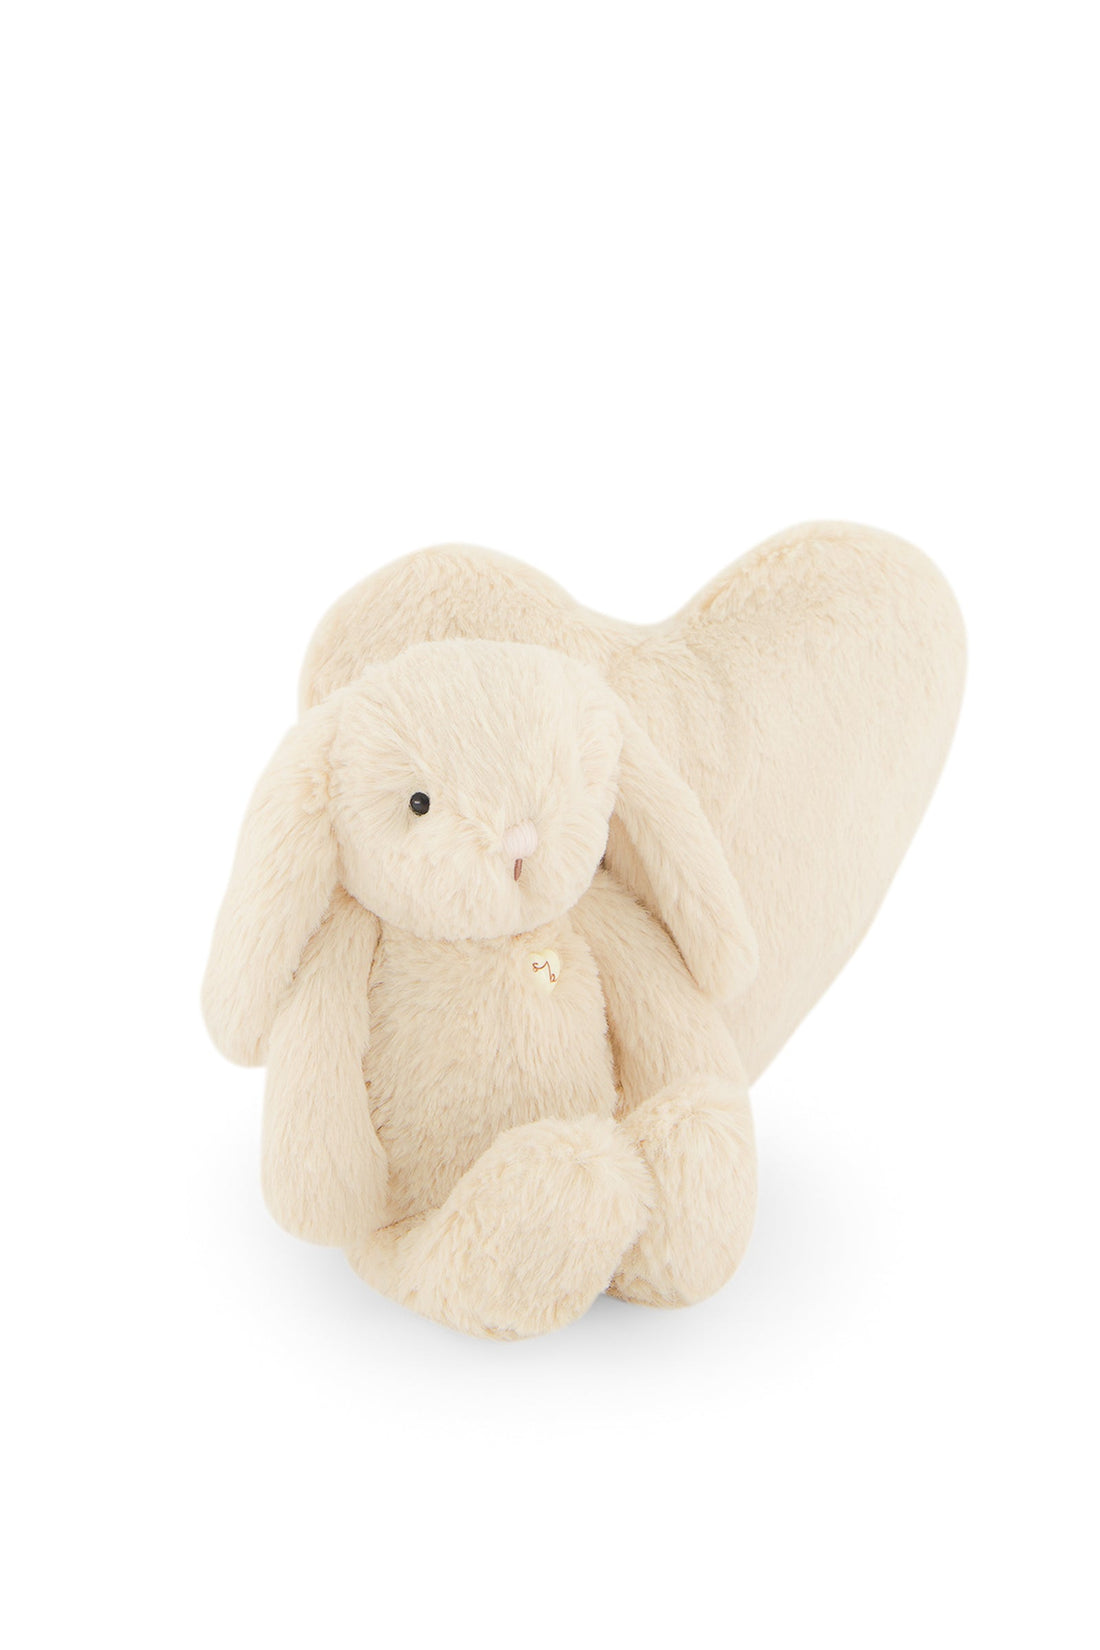 Snuggle Bunnies - Valentines Day - Brulee Childrens Toy from Jamie Kay USA